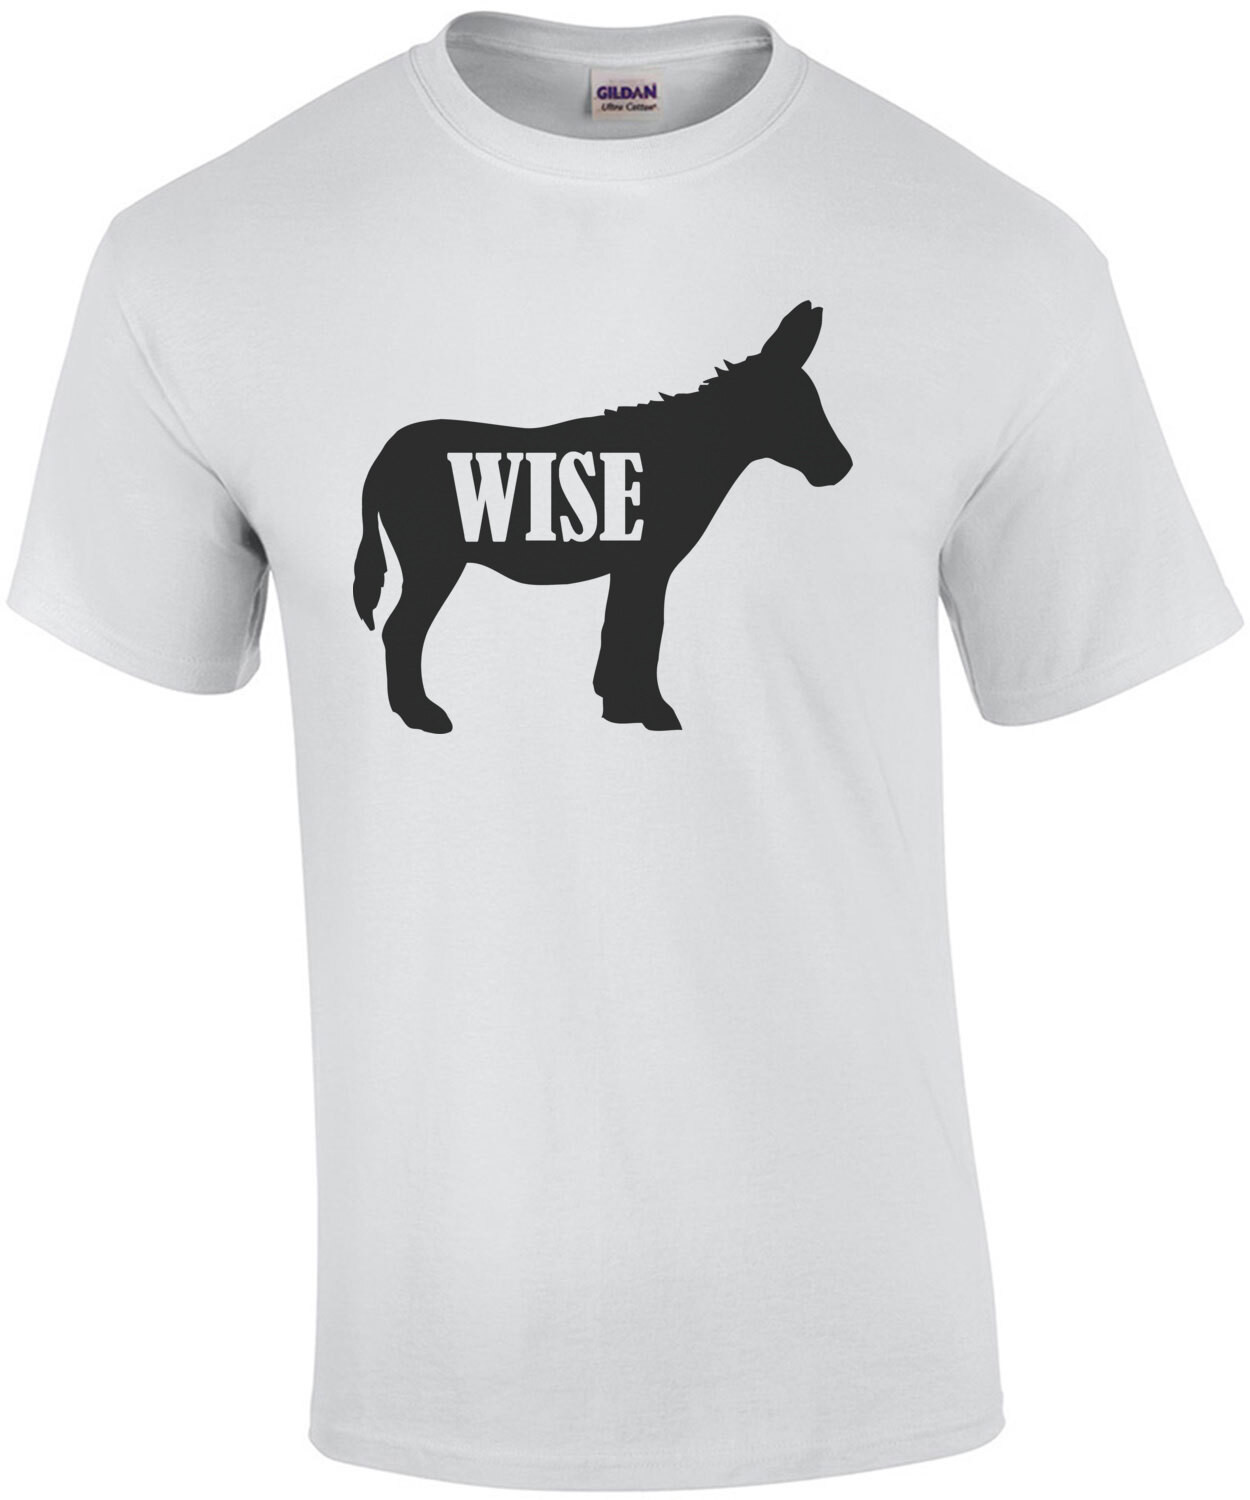 Wise Ass - funny t-shirt